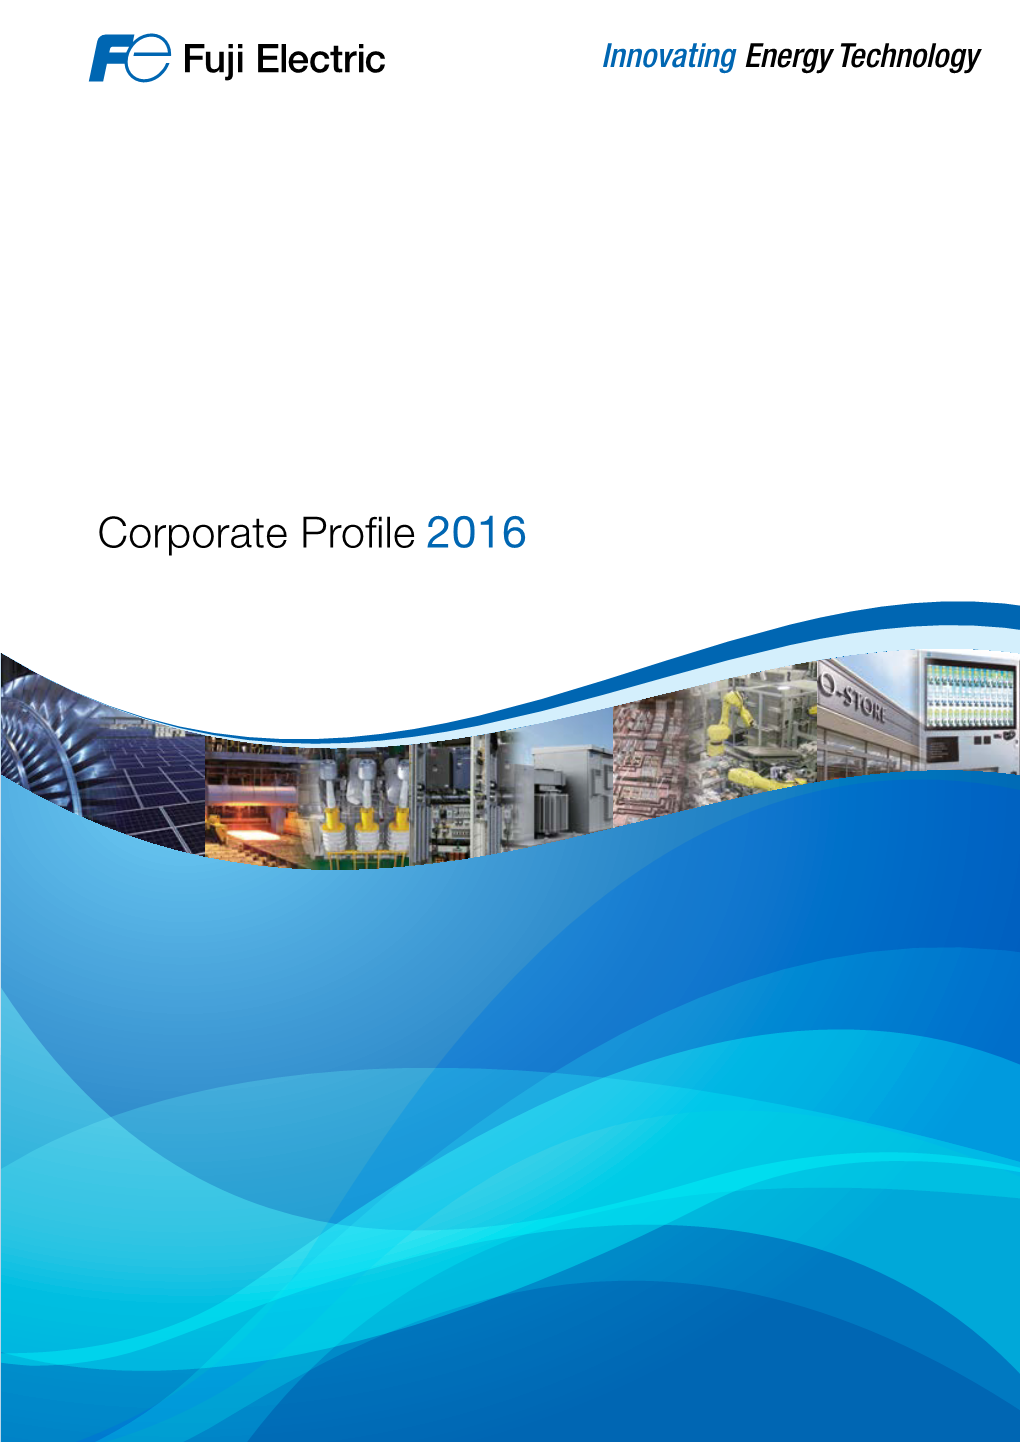 Corporate Profile 2016 Contributing to the Creation of Sustainable Societies Through Our Brand Statement Energy and Environment Businesses